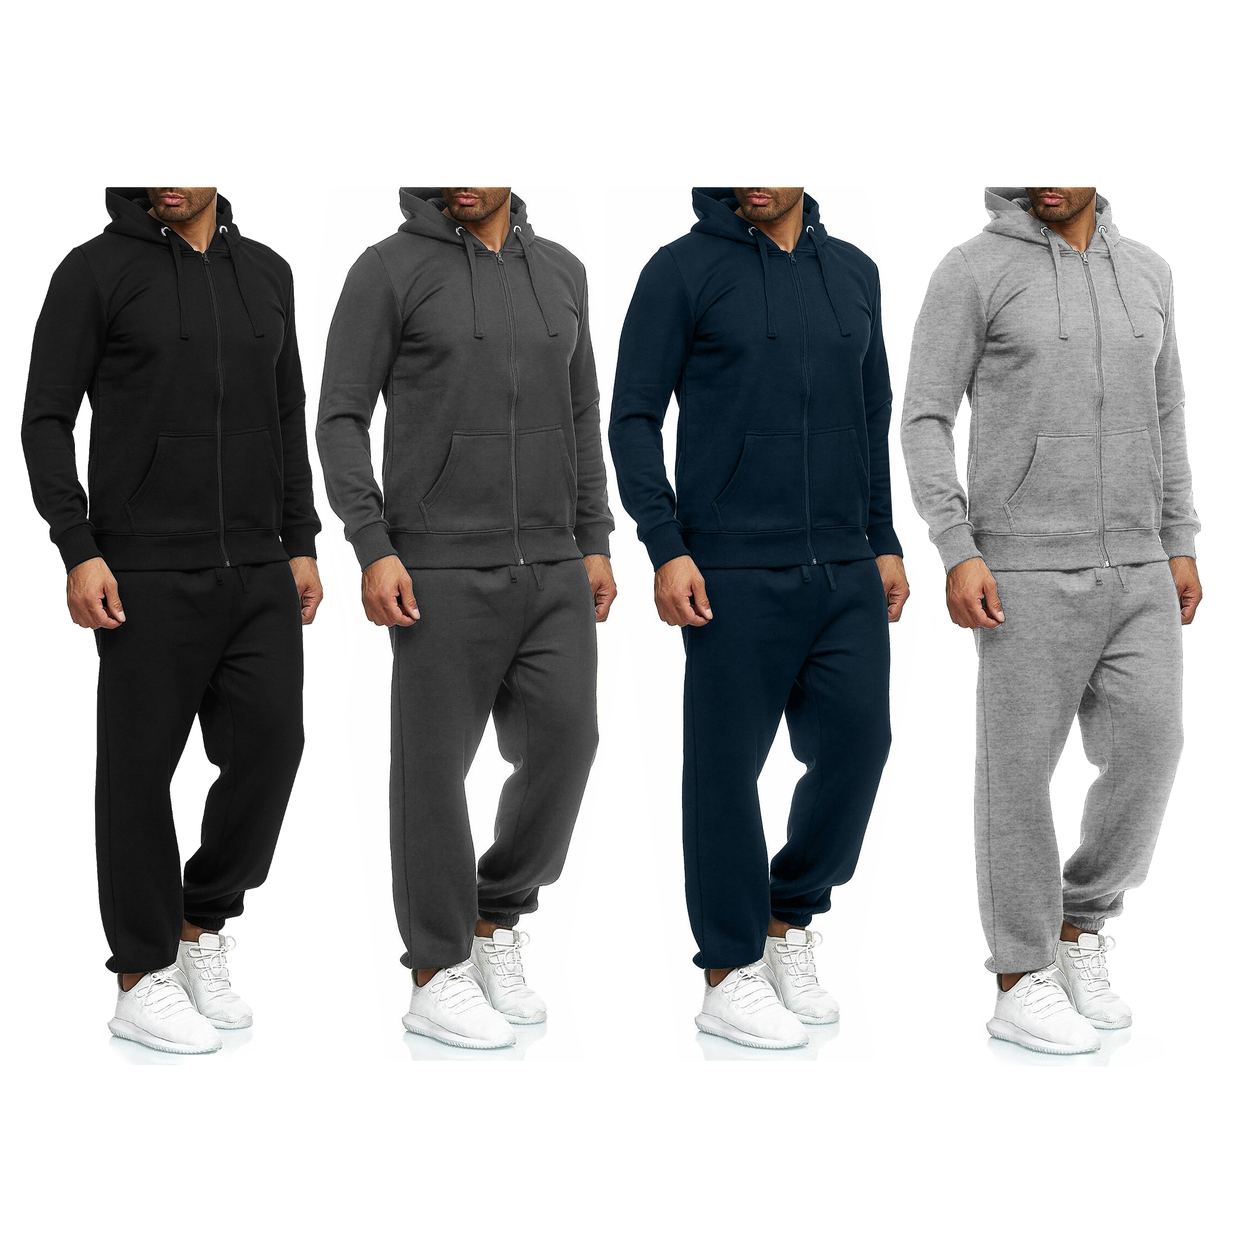 Multi-Pack: Men's Casual Big & Tall Athletic Active Winter Warm Fleece Lined Full Zip Tracksuit Jogger Set - Black, 2-pack, 3xl